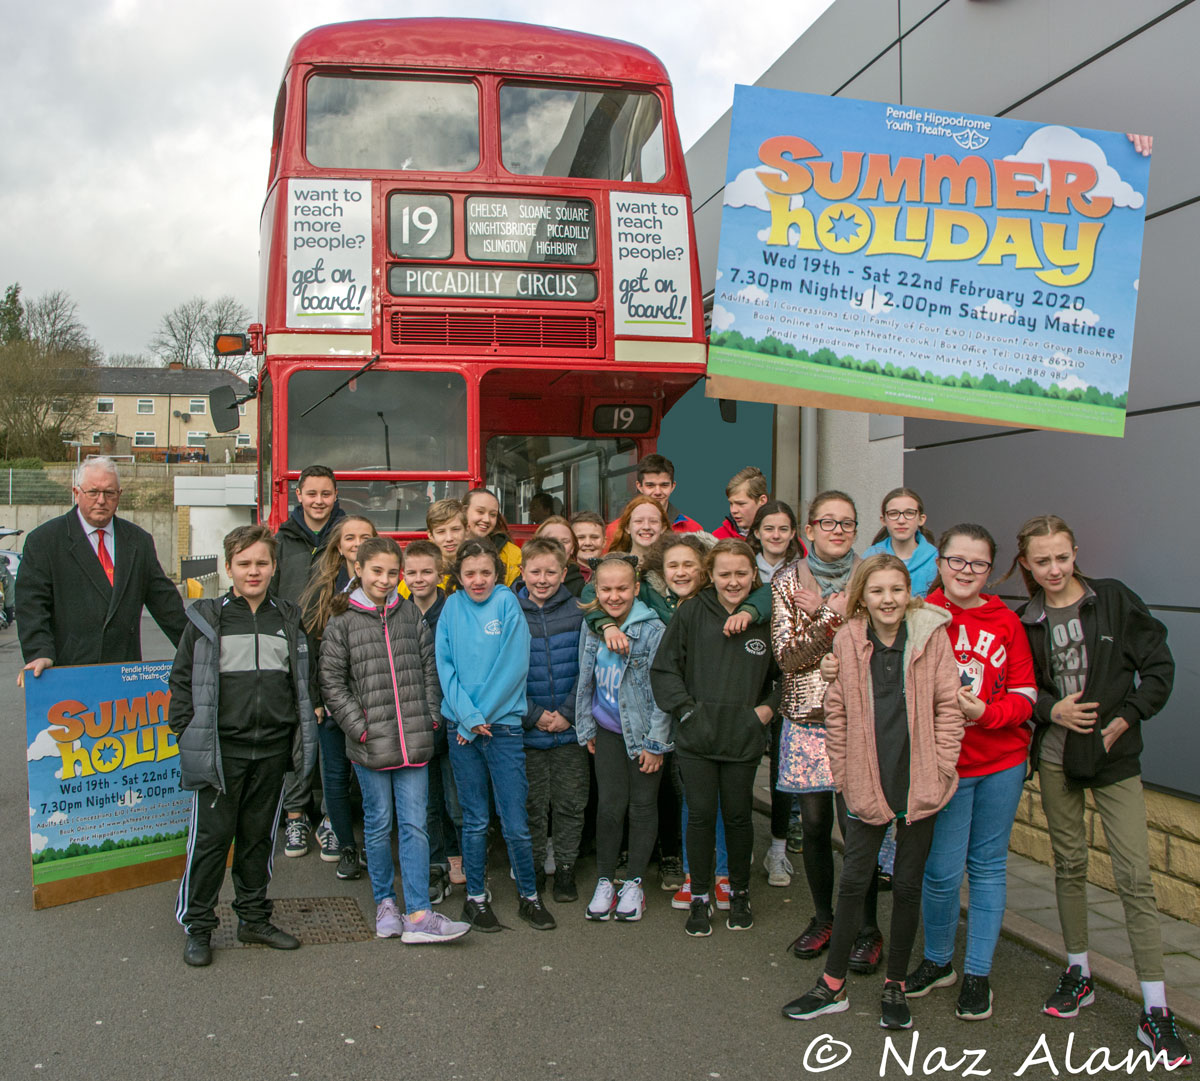 Pendle Hippodrome Youth Theatre - promoting 'Summer Holiday'